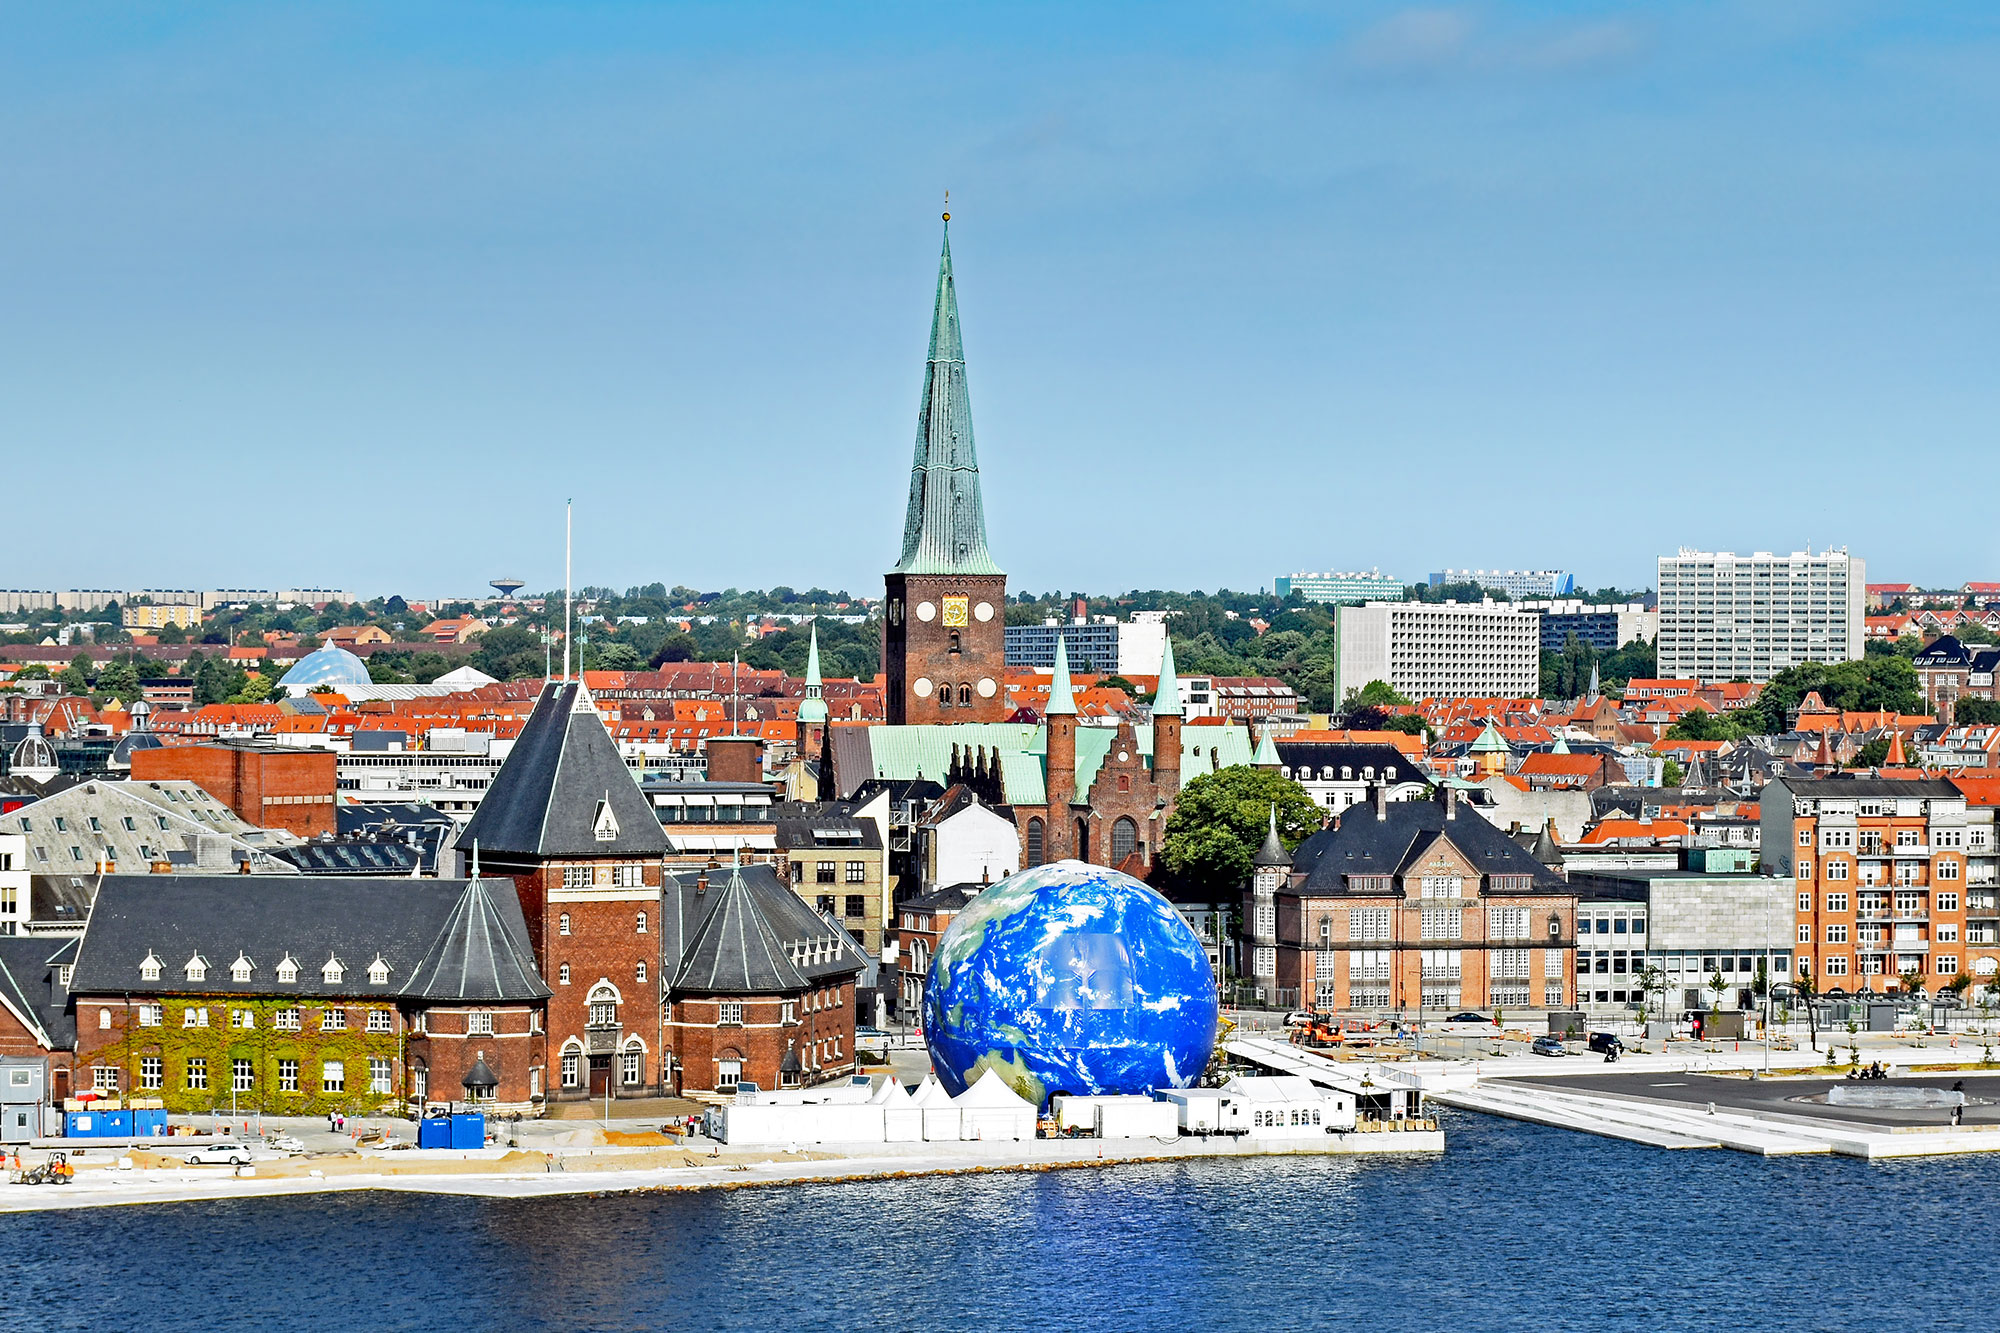 Cityscape of Arrhus, Denmark on a bright sunny day with harbor and blue and green earth globe sculpture